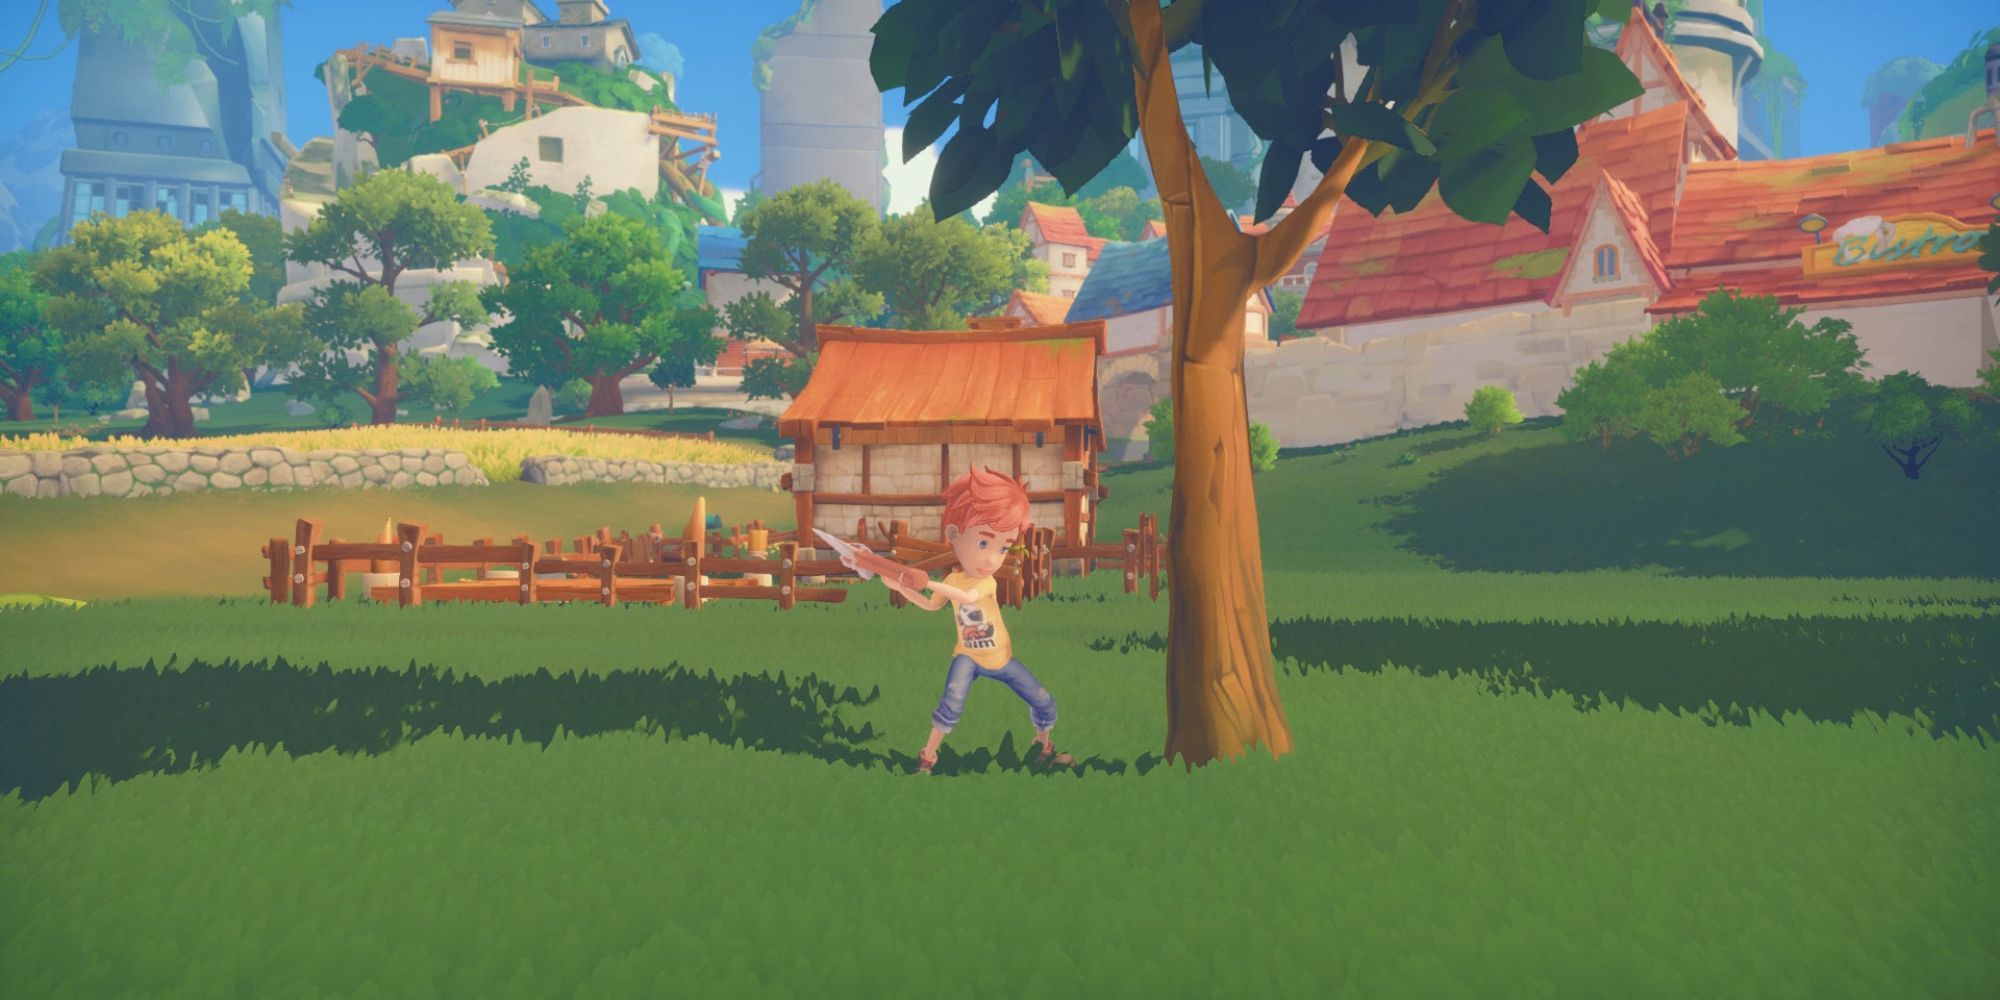 The protagonist swings his axe towards a tree in a grassy field